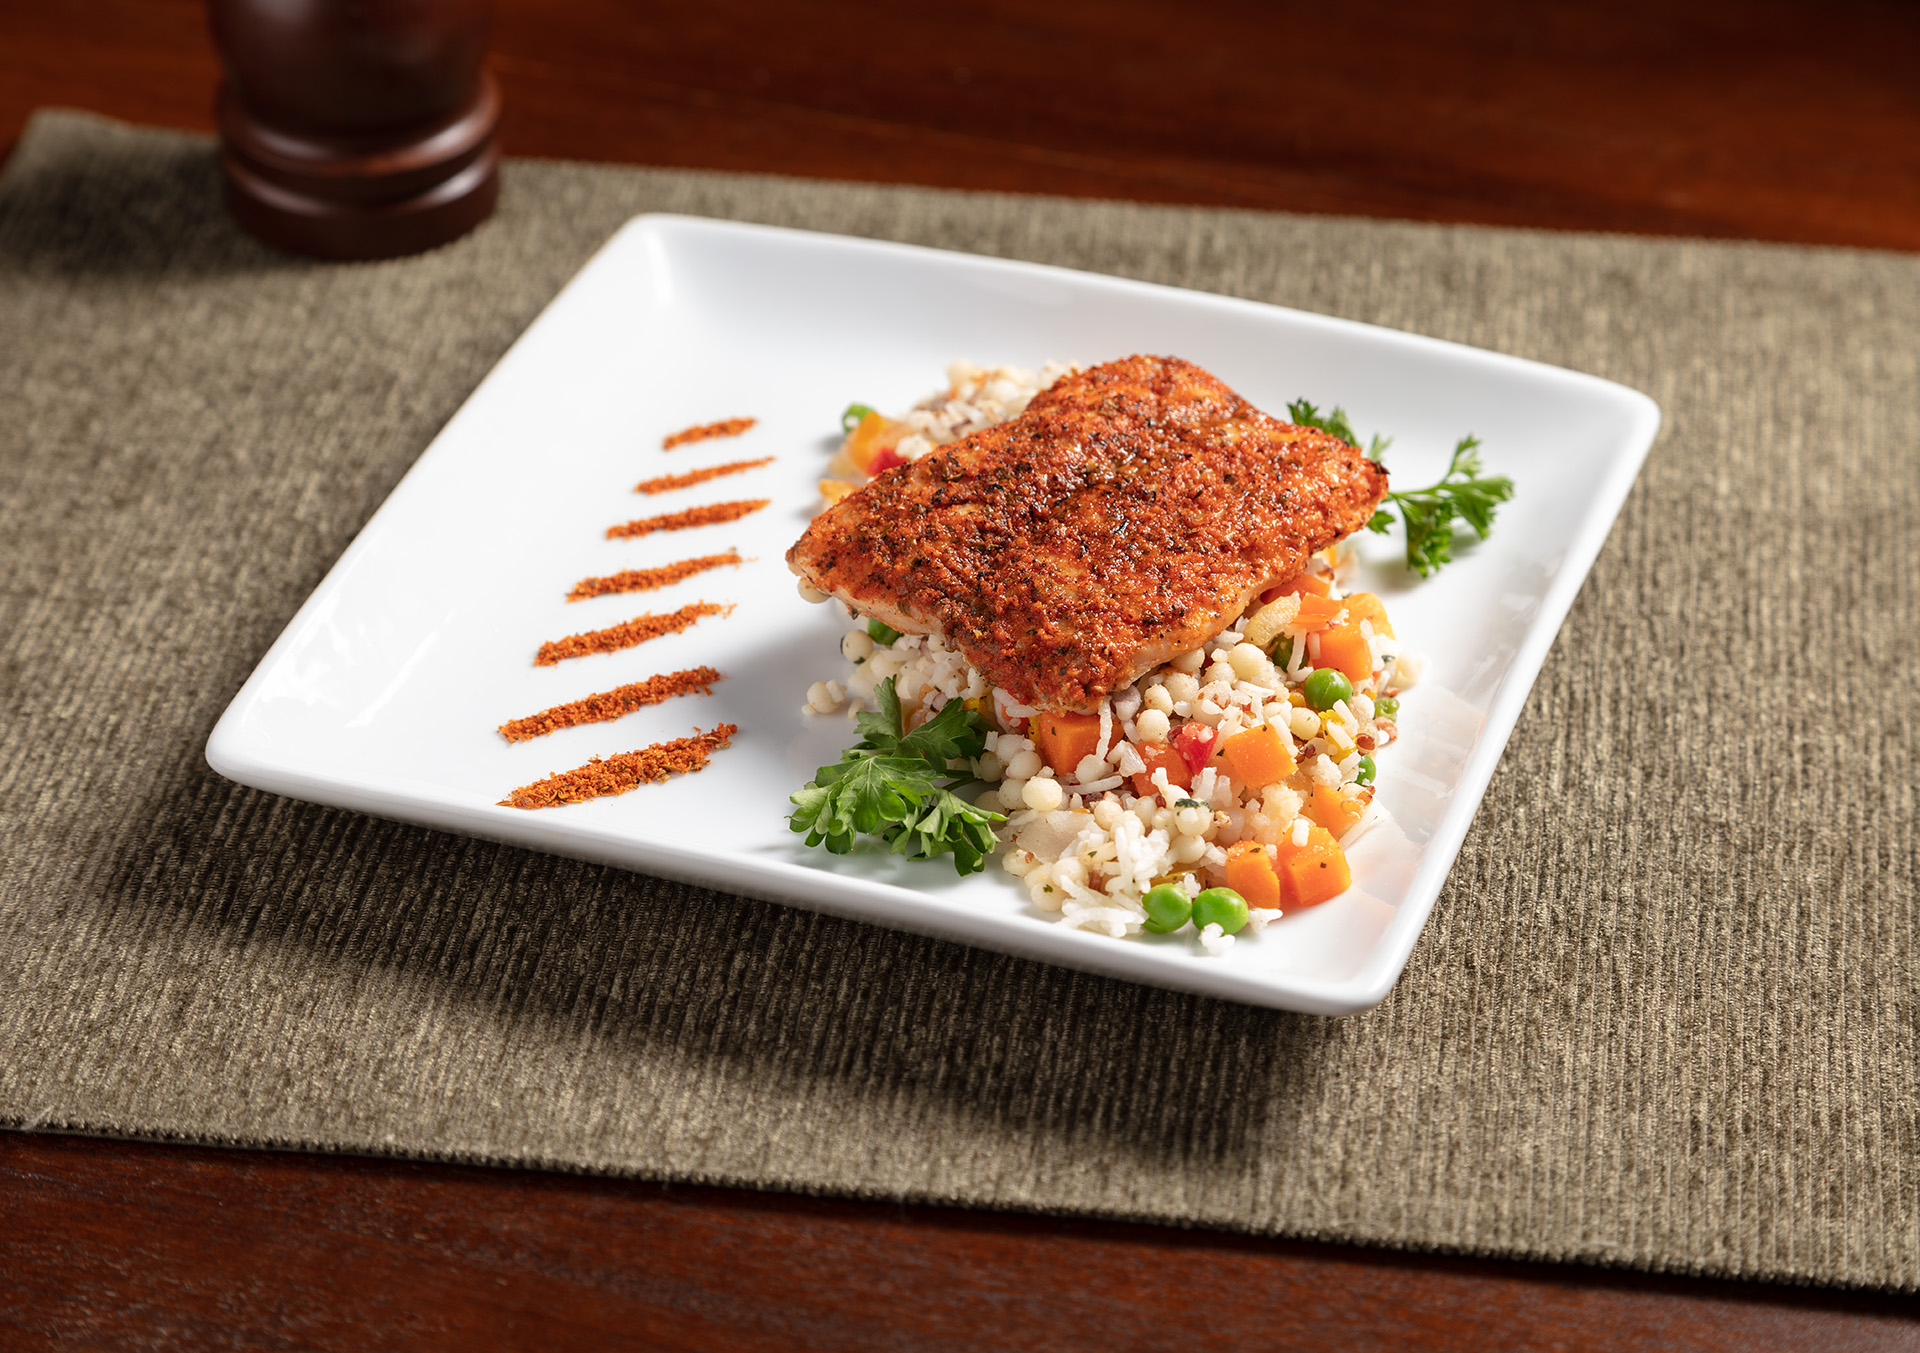 Picture of Fusia Foods' blackened salmon ready-to-eat meal.